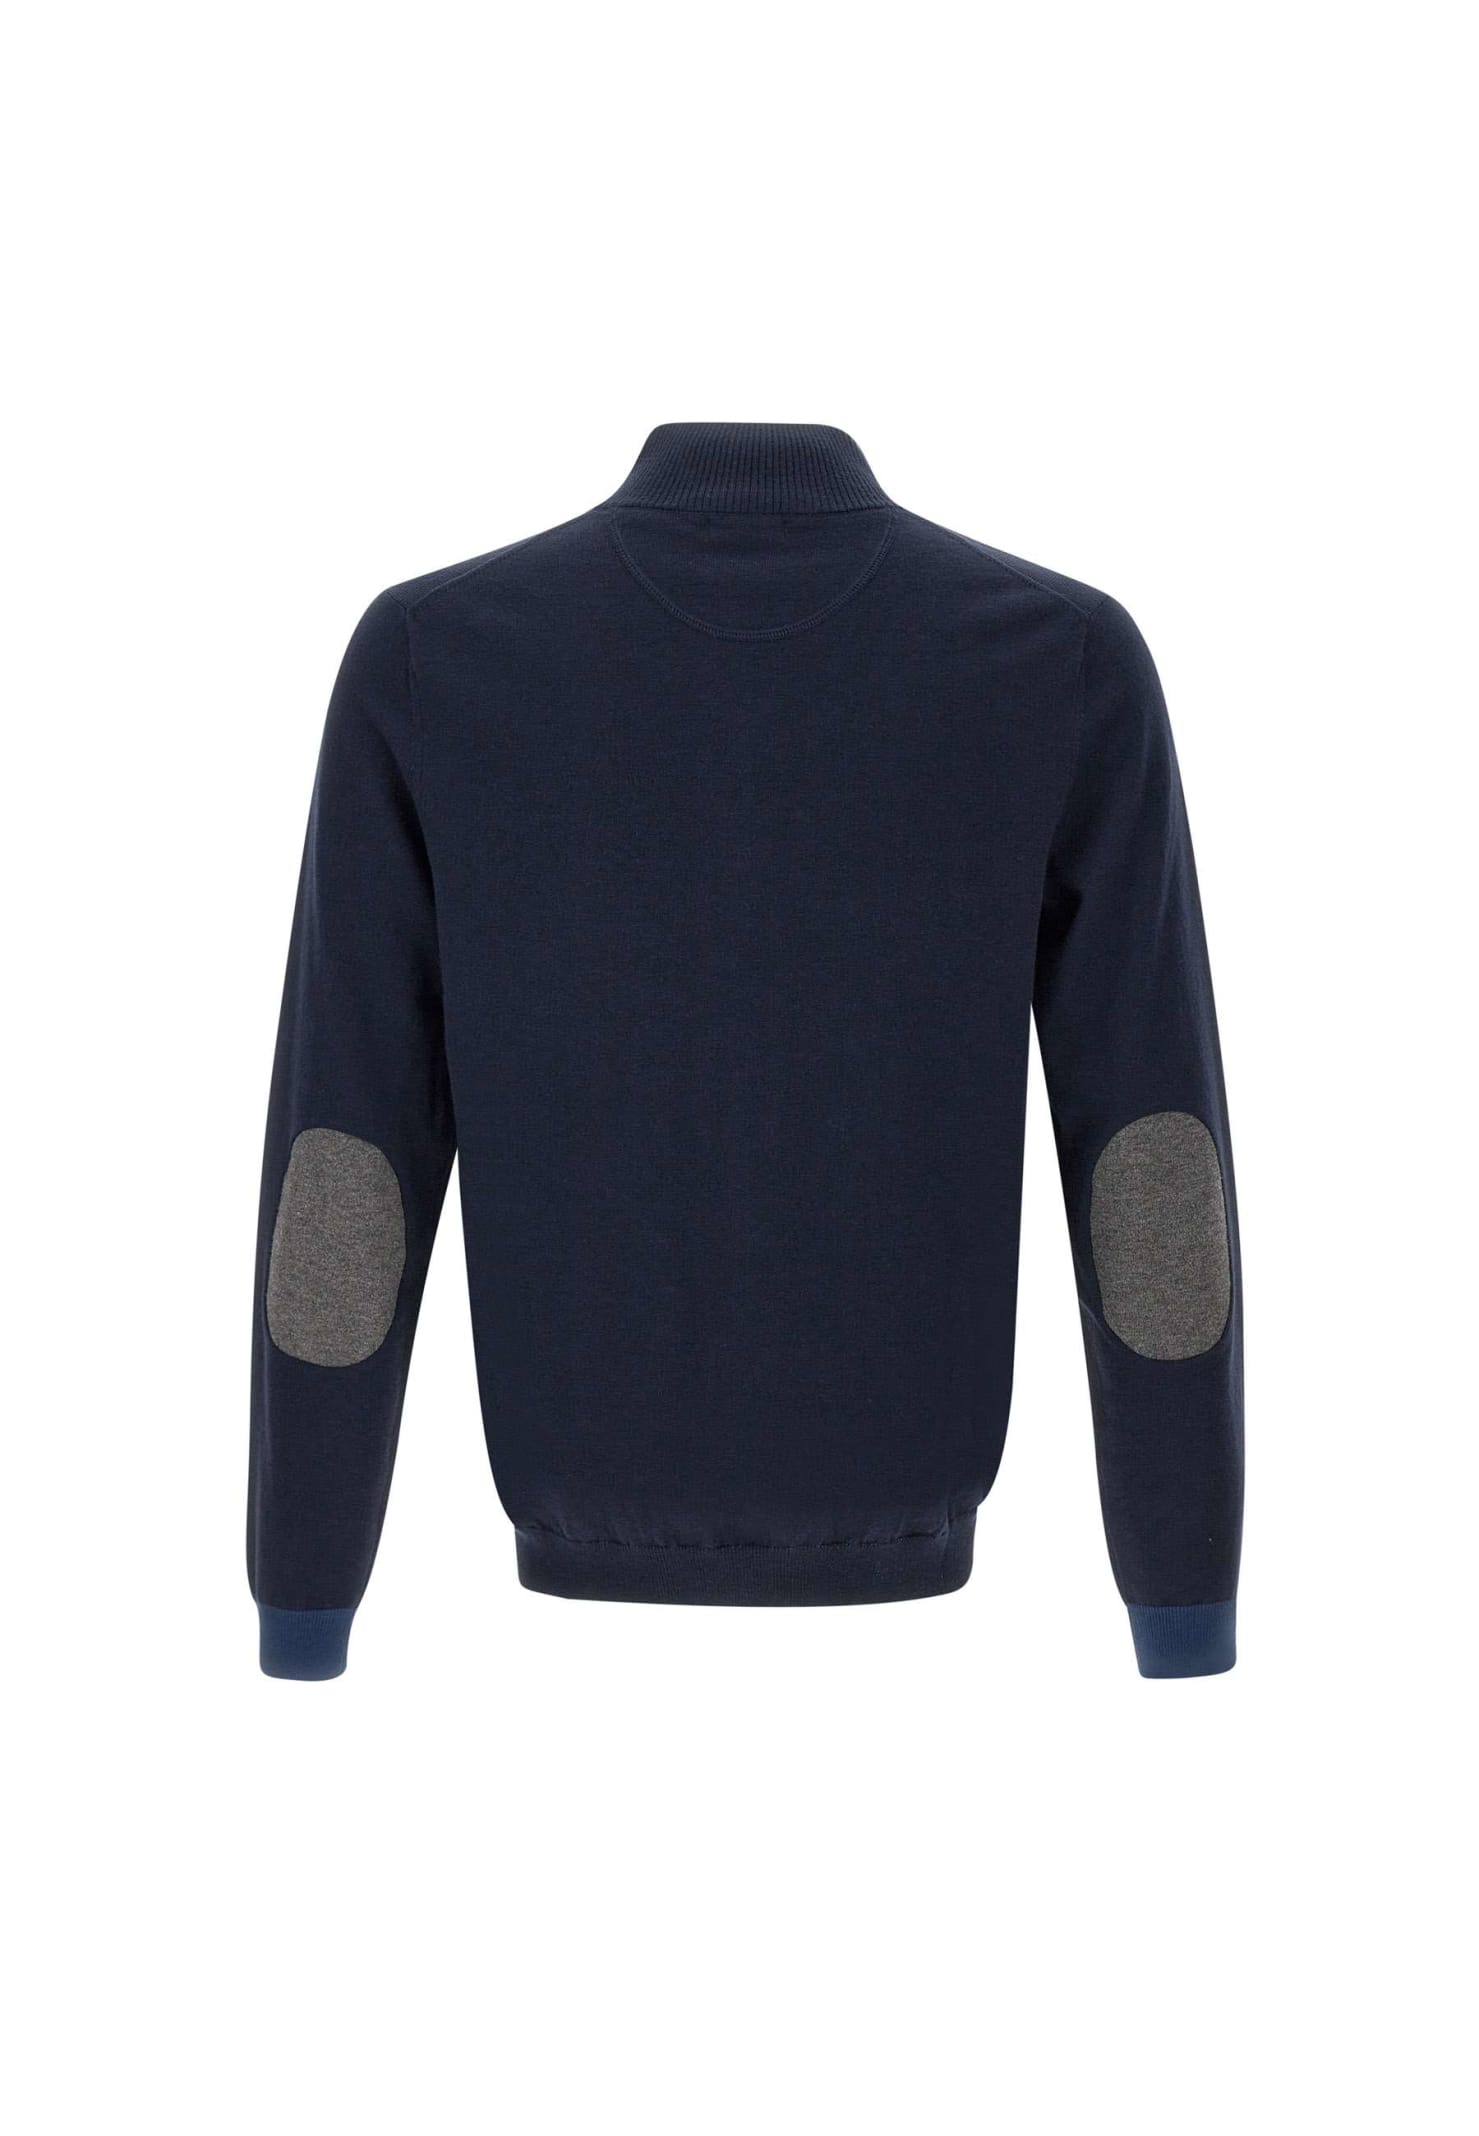 Shop Sun 68 Stripes Cotton And Wool Sweater Sweater In Navy Blue